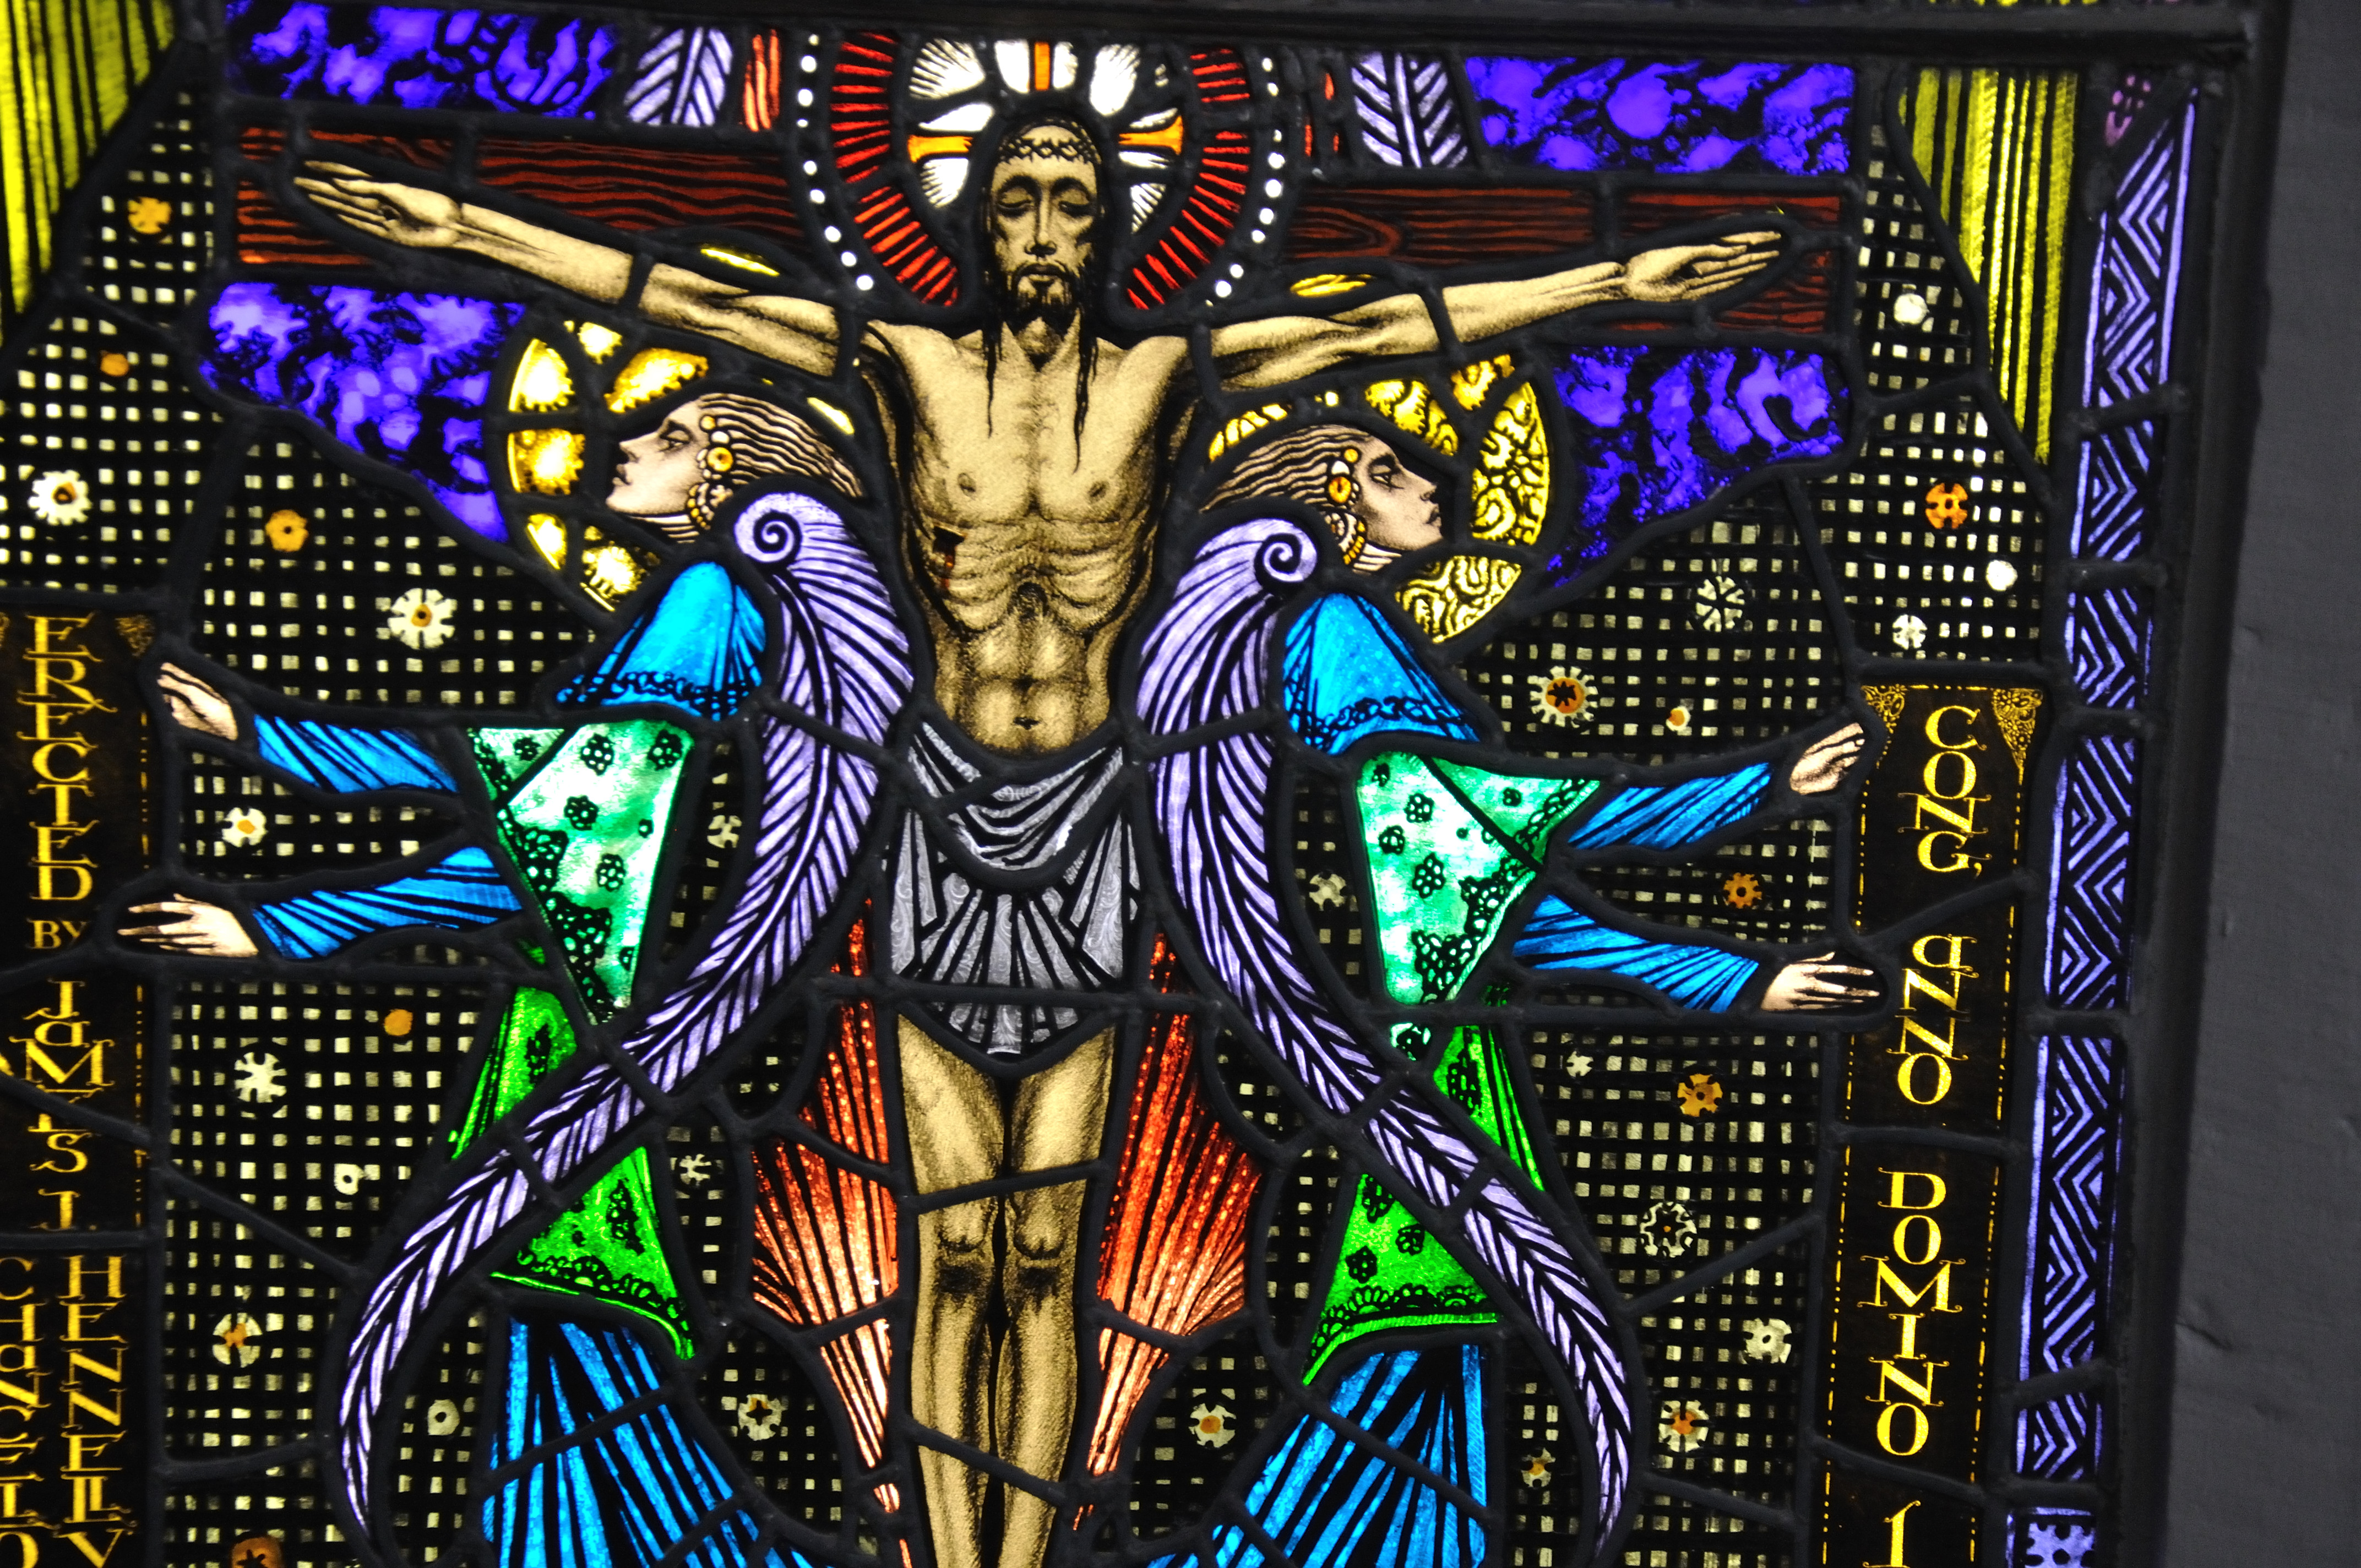 HD wallpaper stained glass, photography, religious